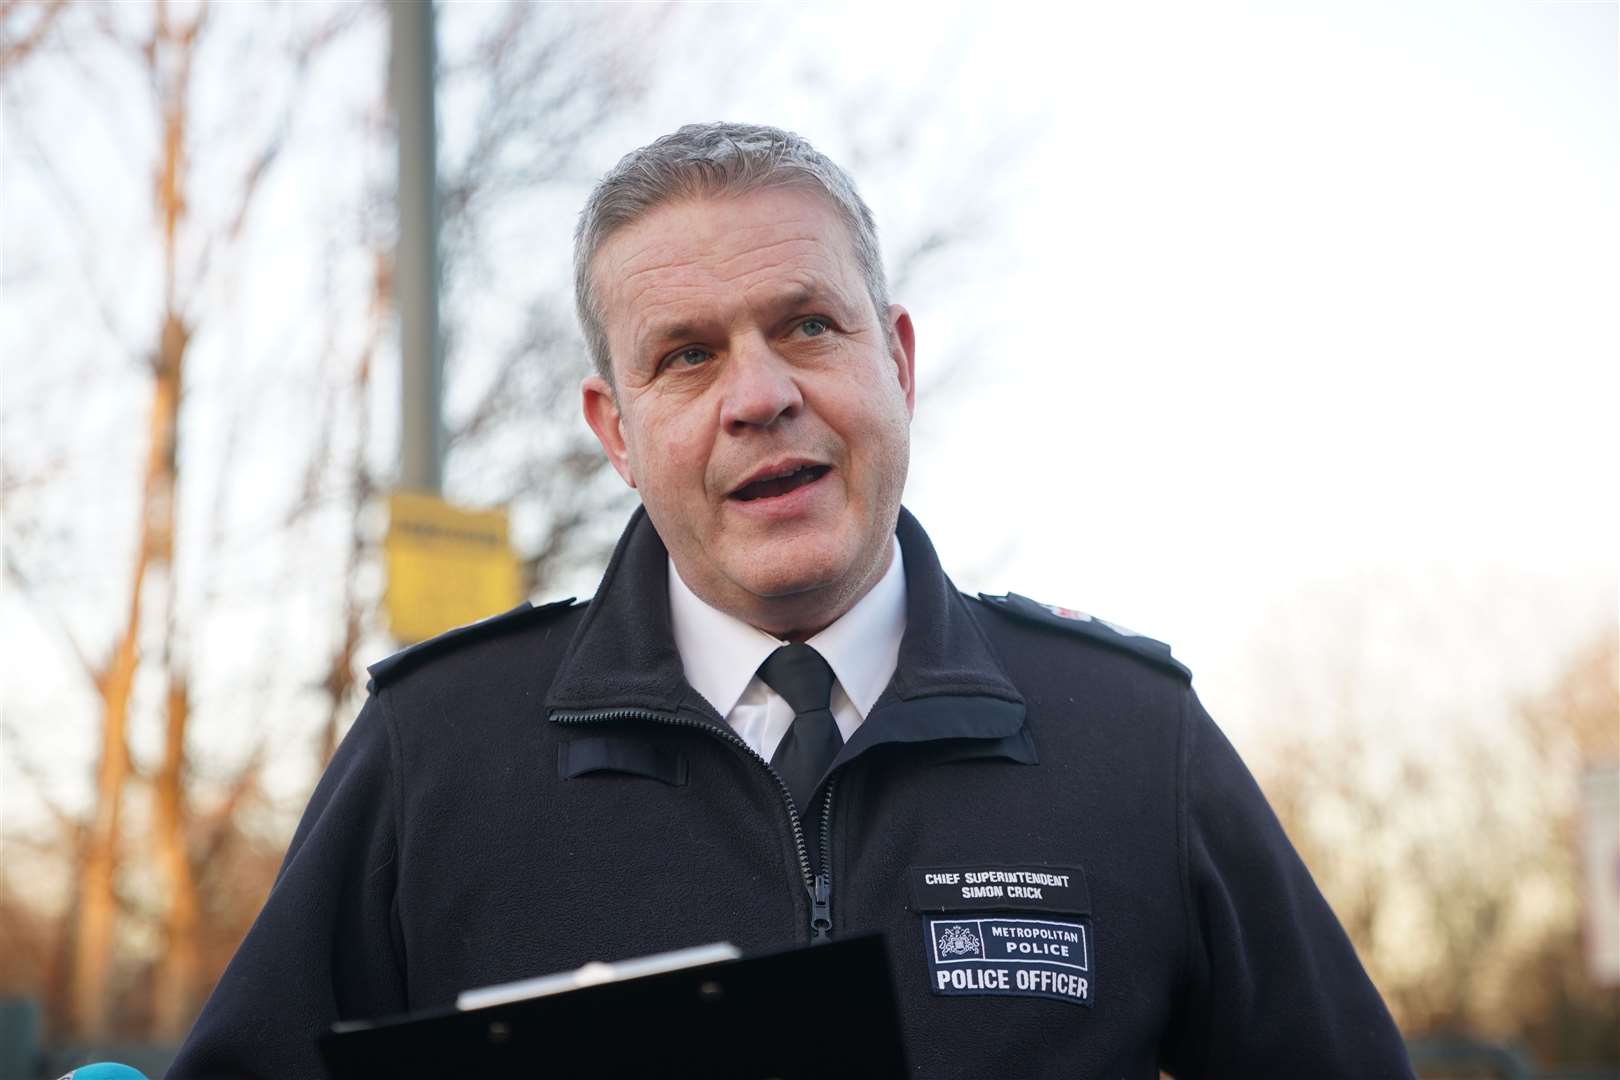 Chief Superintendent Simon Crick urged anyone with information to contact police ‘immediately’ (Yui Mok/PA)